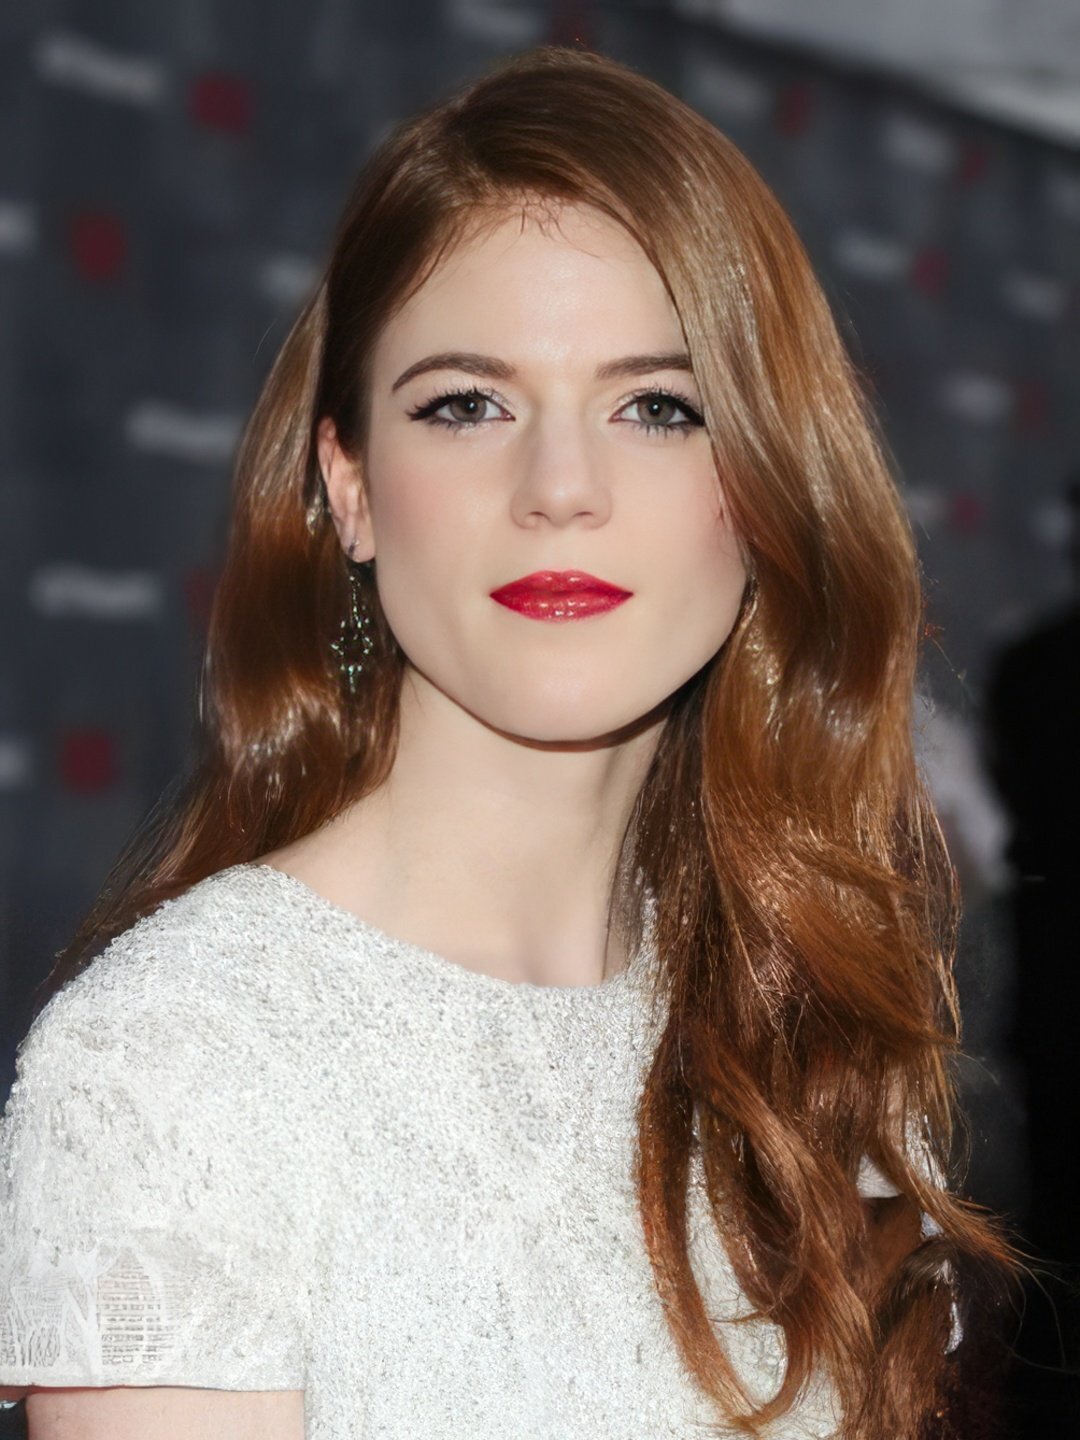 Rose Leslie early life